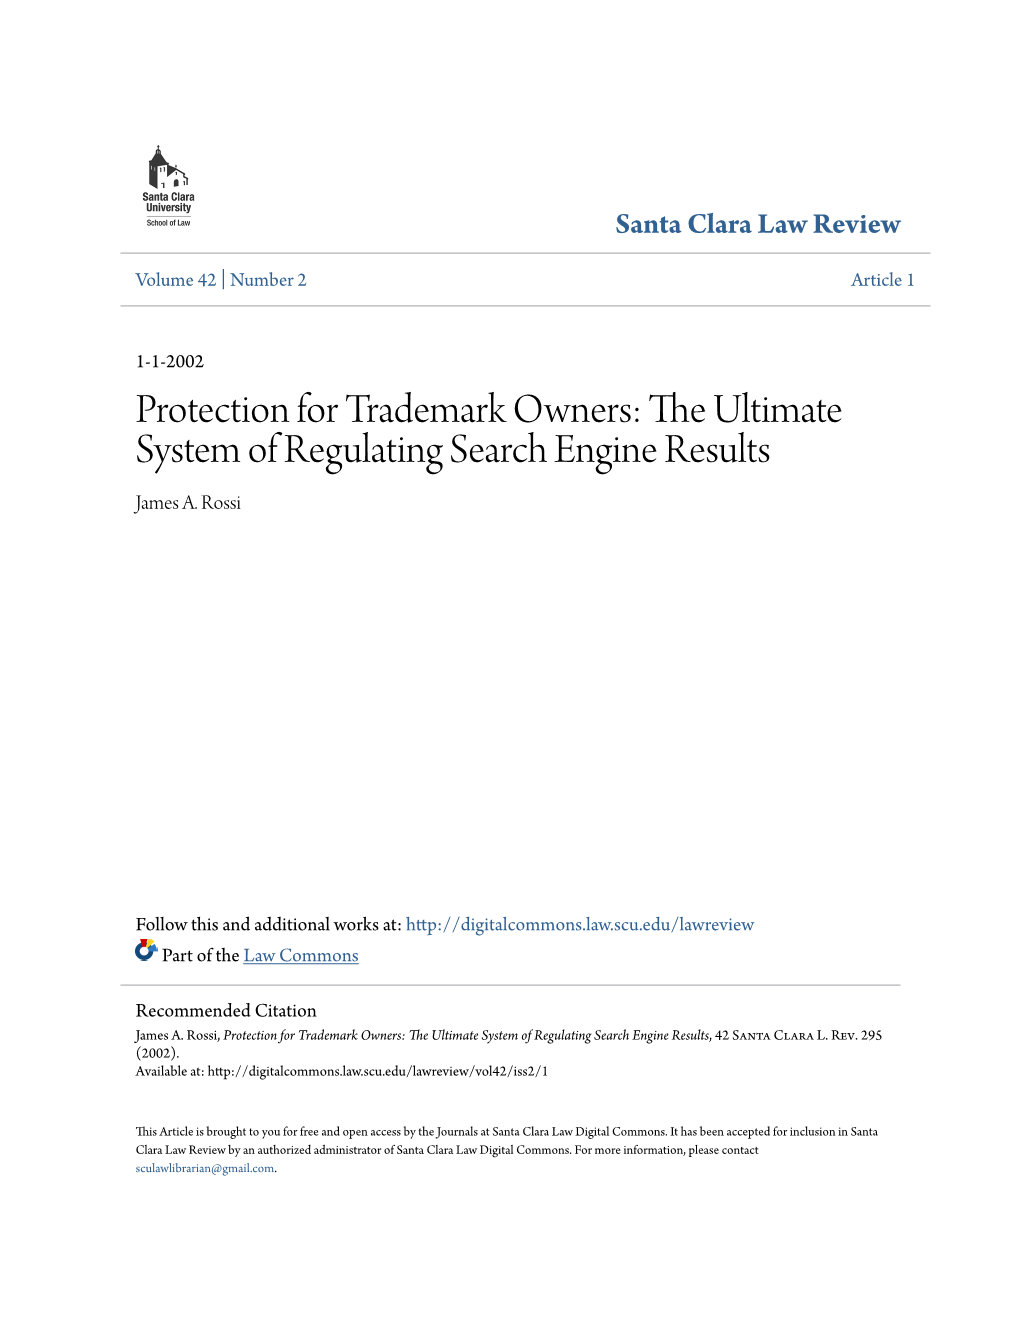 Protection for Trademark Owners: the Ultimate System of Regulating Search Engine Results James A